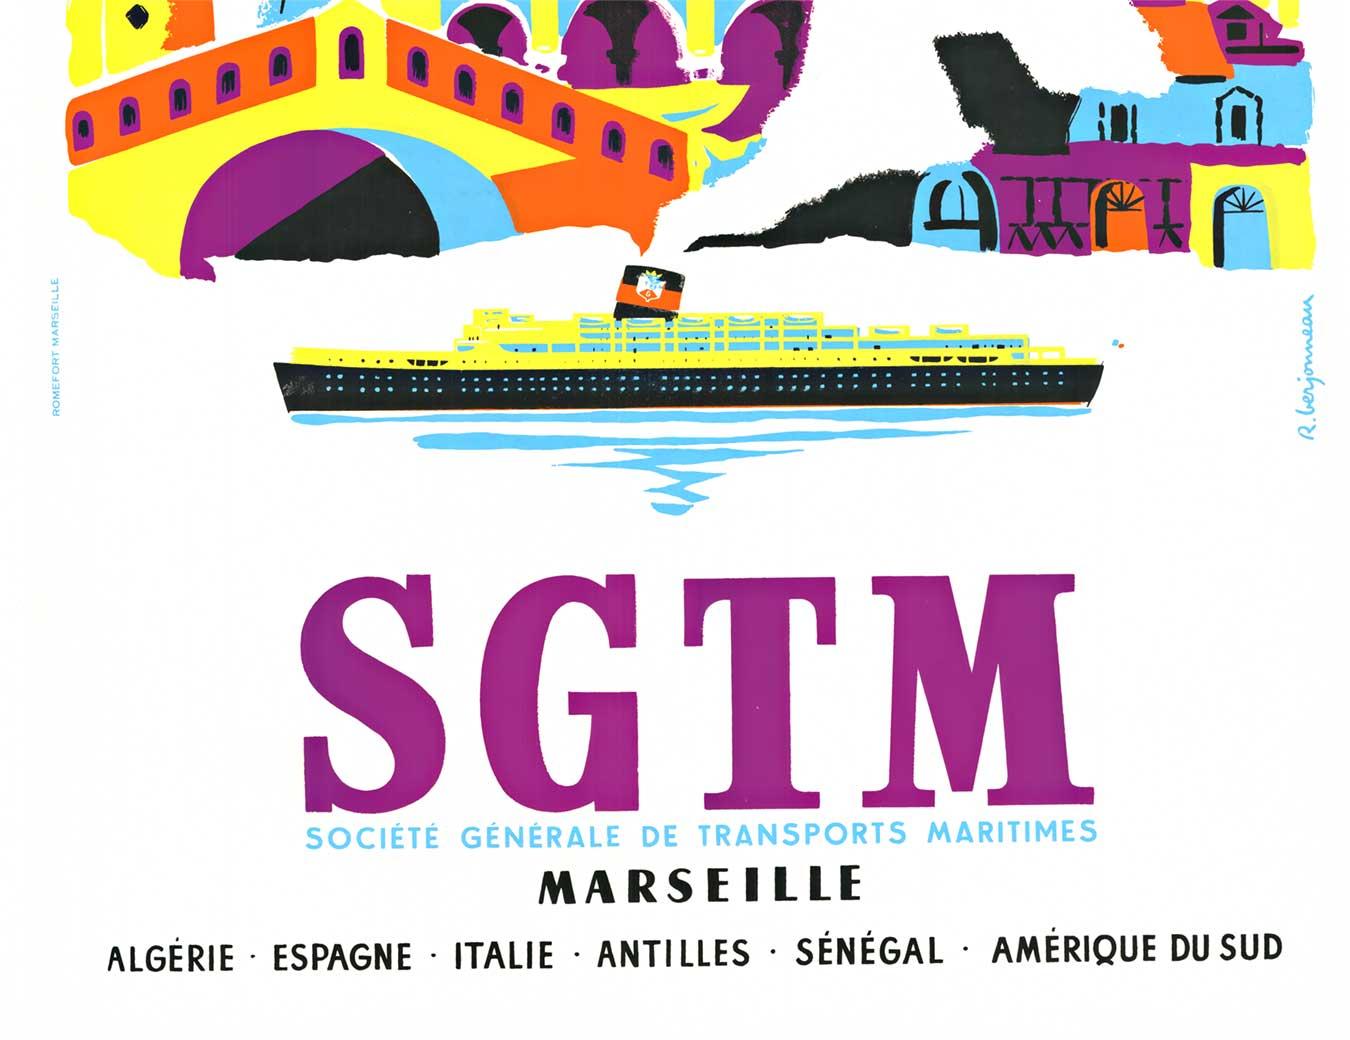 Original SGTM Marseille vintage cruise line vintage travel poster - Abstract Expressionist Print by Raoul Berjonneau